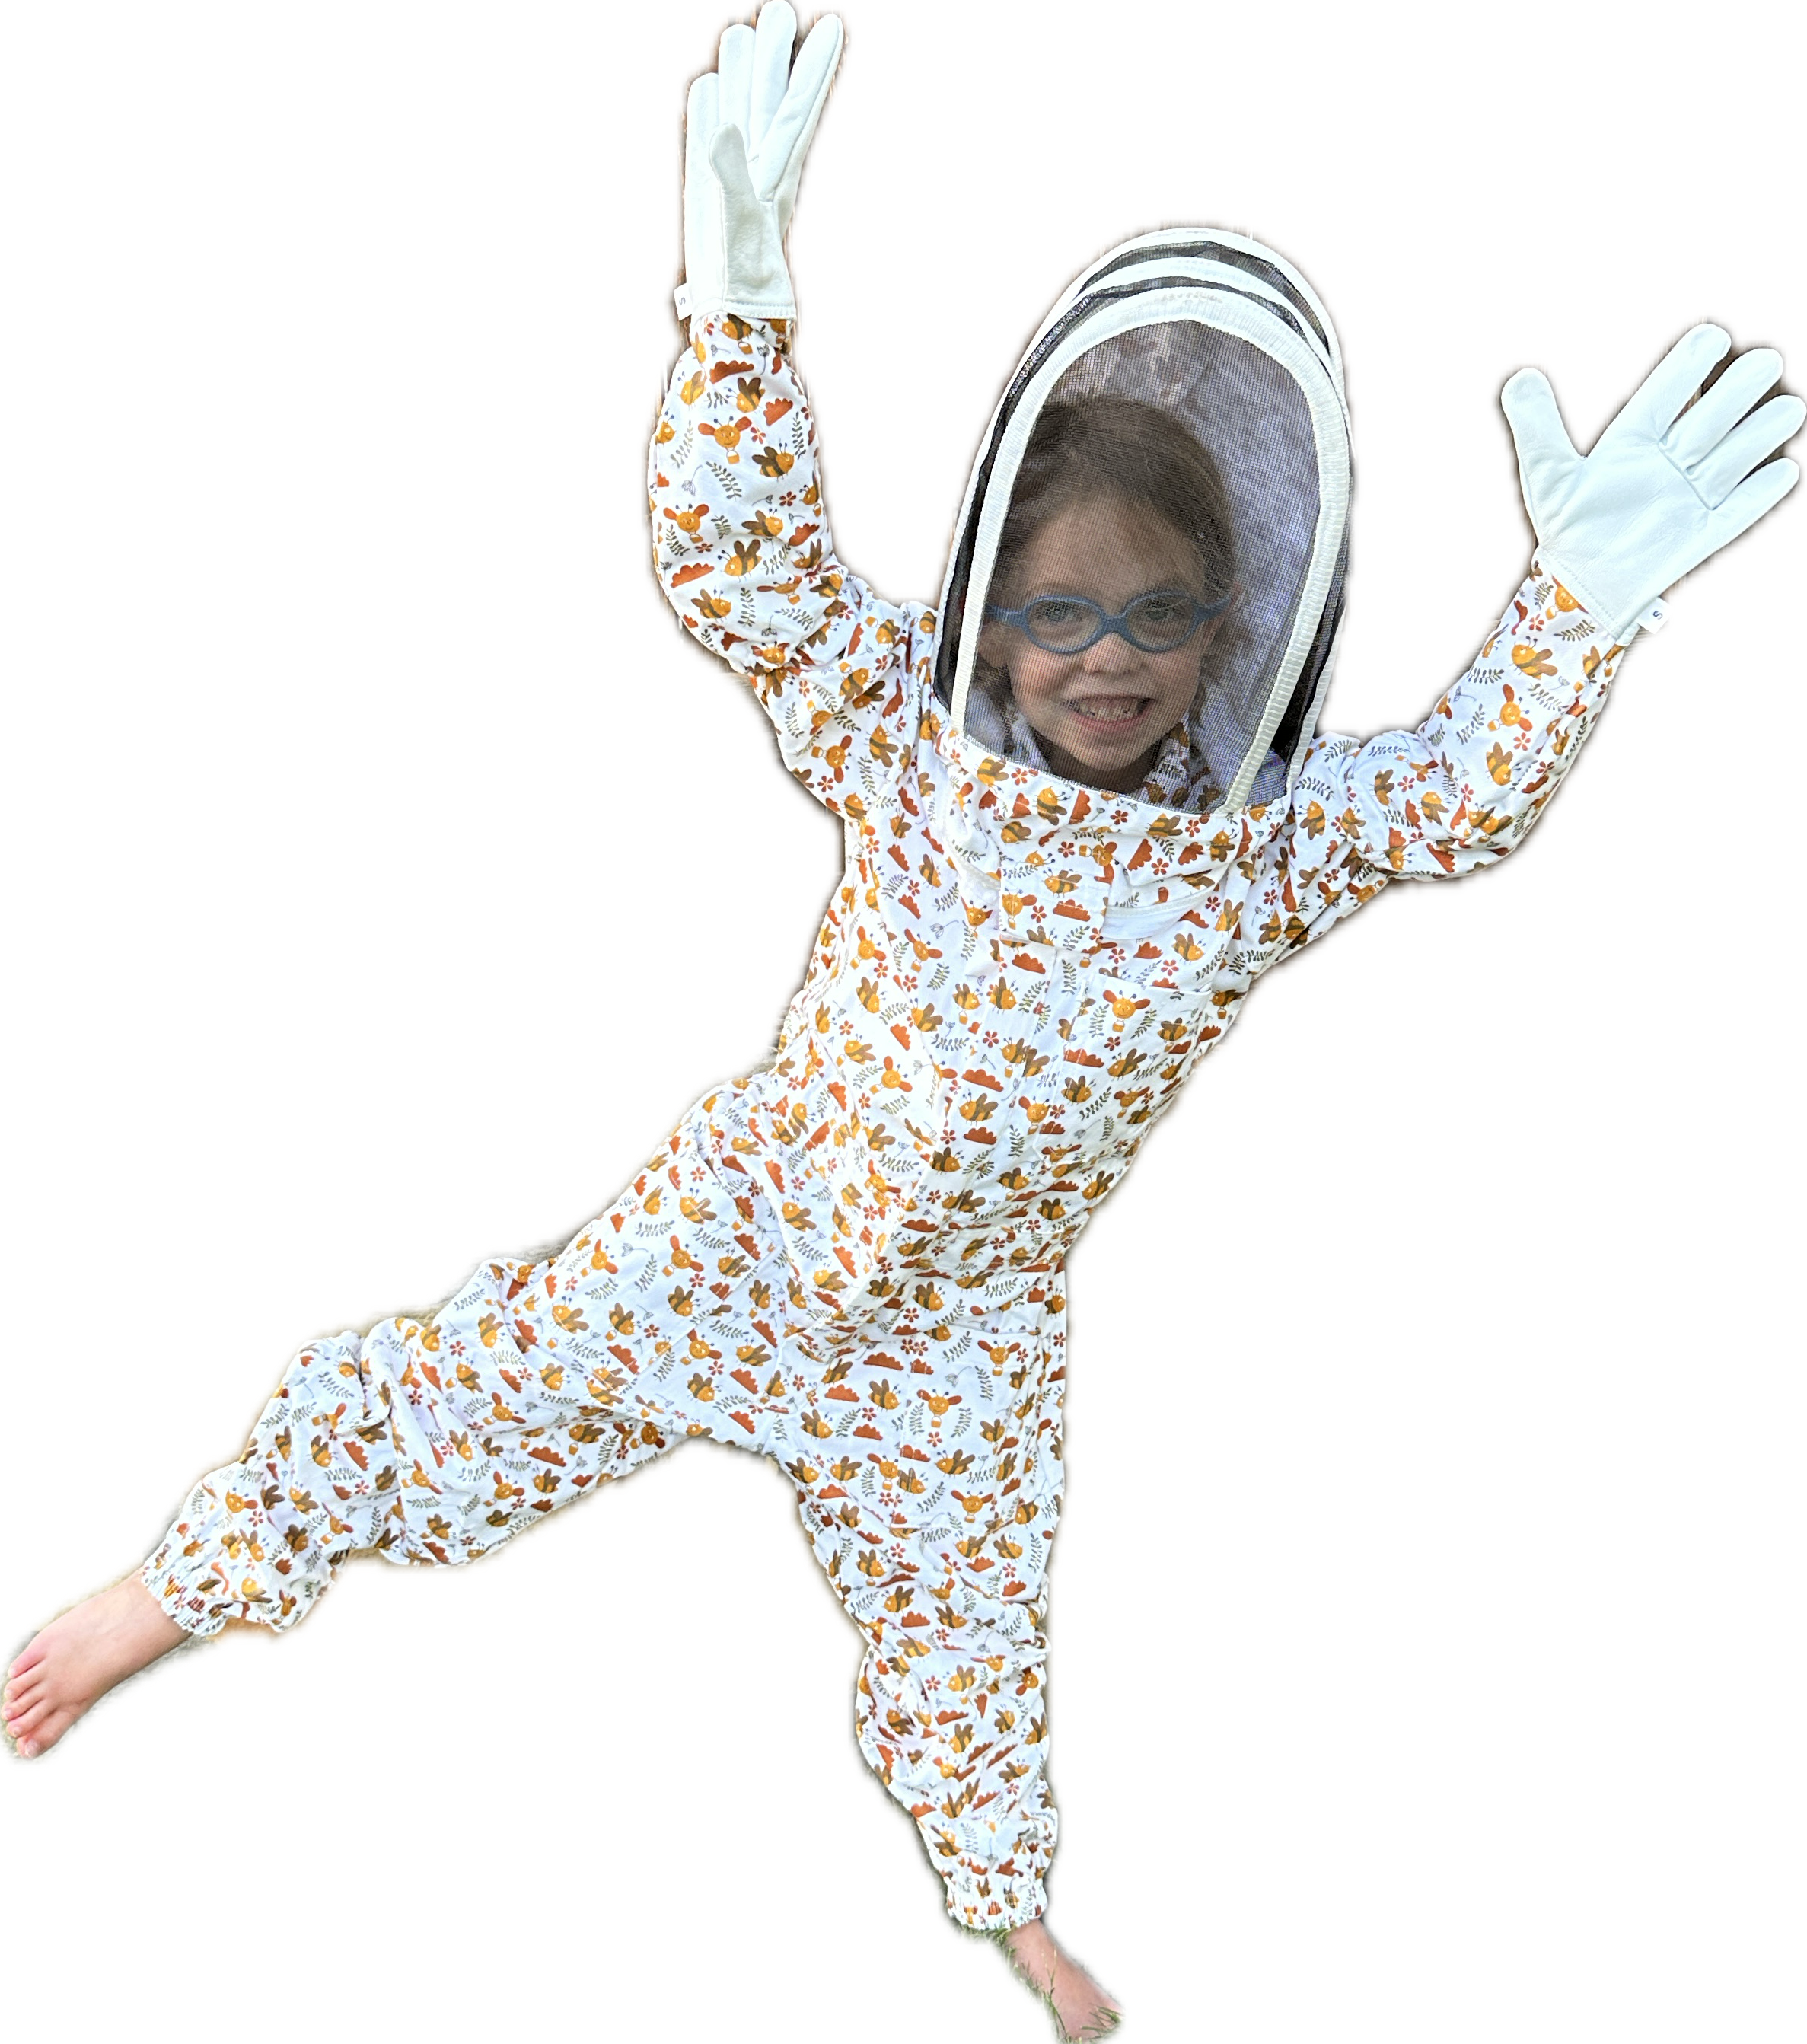 Floral honey bee suit for kids with a protective fencing veil.